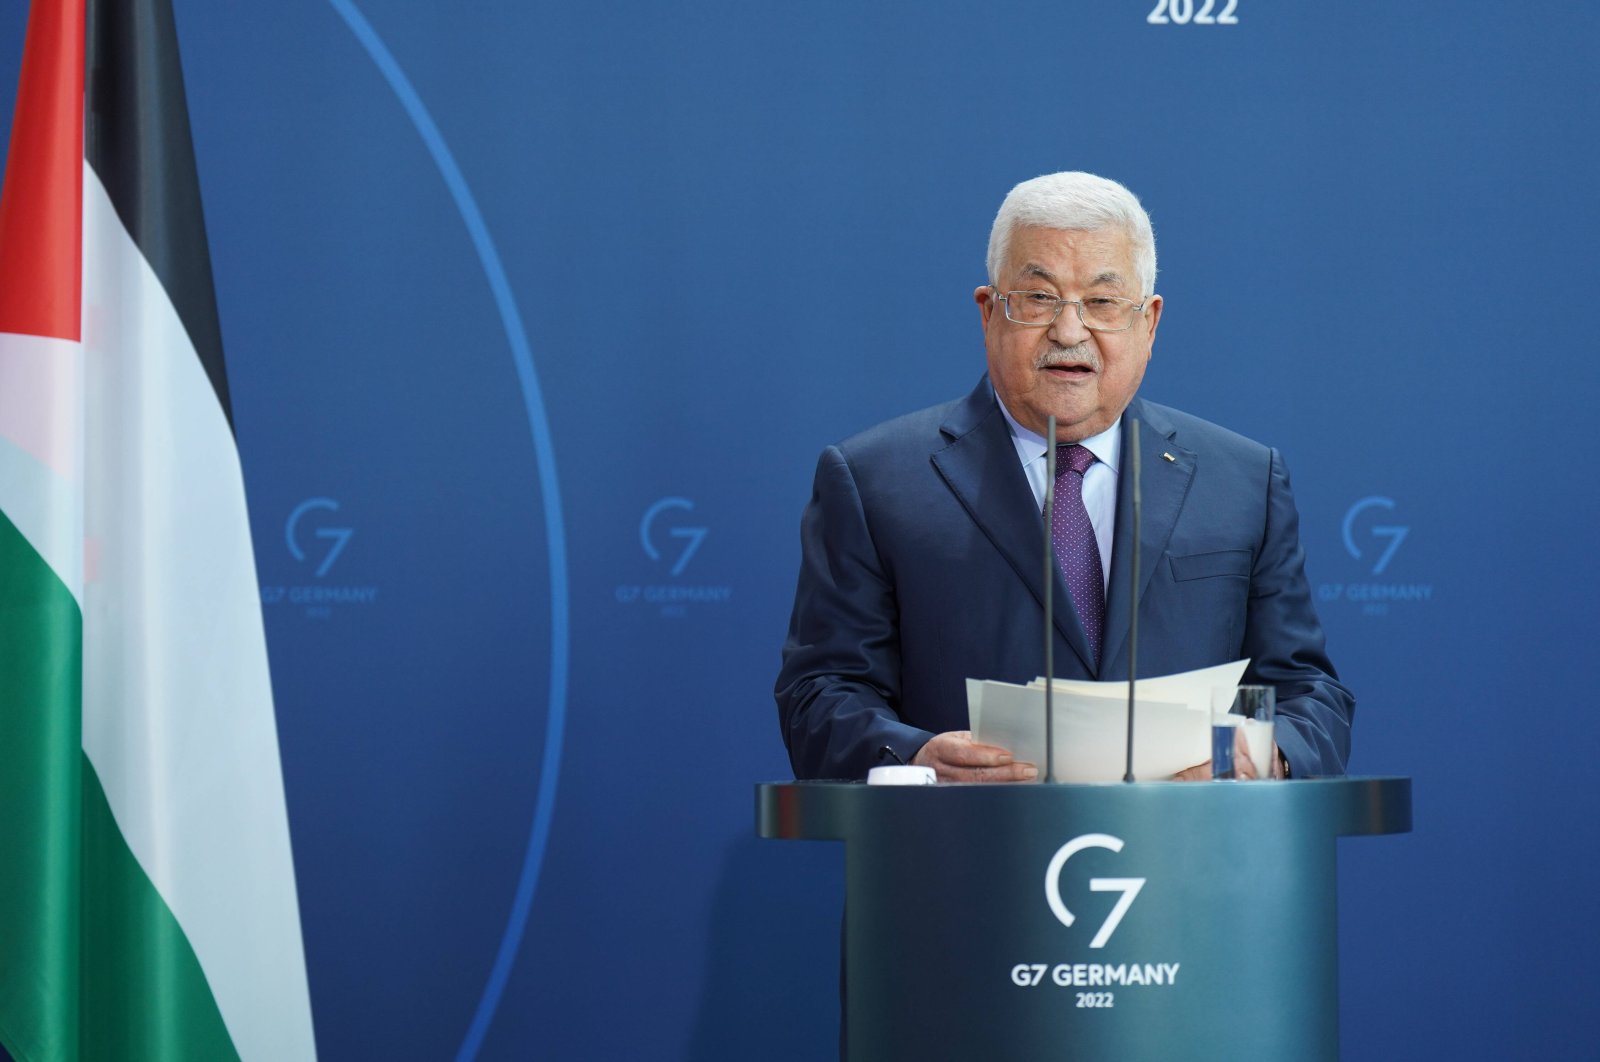 Palestinian President Mahmoud Abbas speaks in a joint news conference after talks with German Chancellor Olaf Scholz in Berlin, Germany, Aug. 16, 2022. (Reuters Photo)